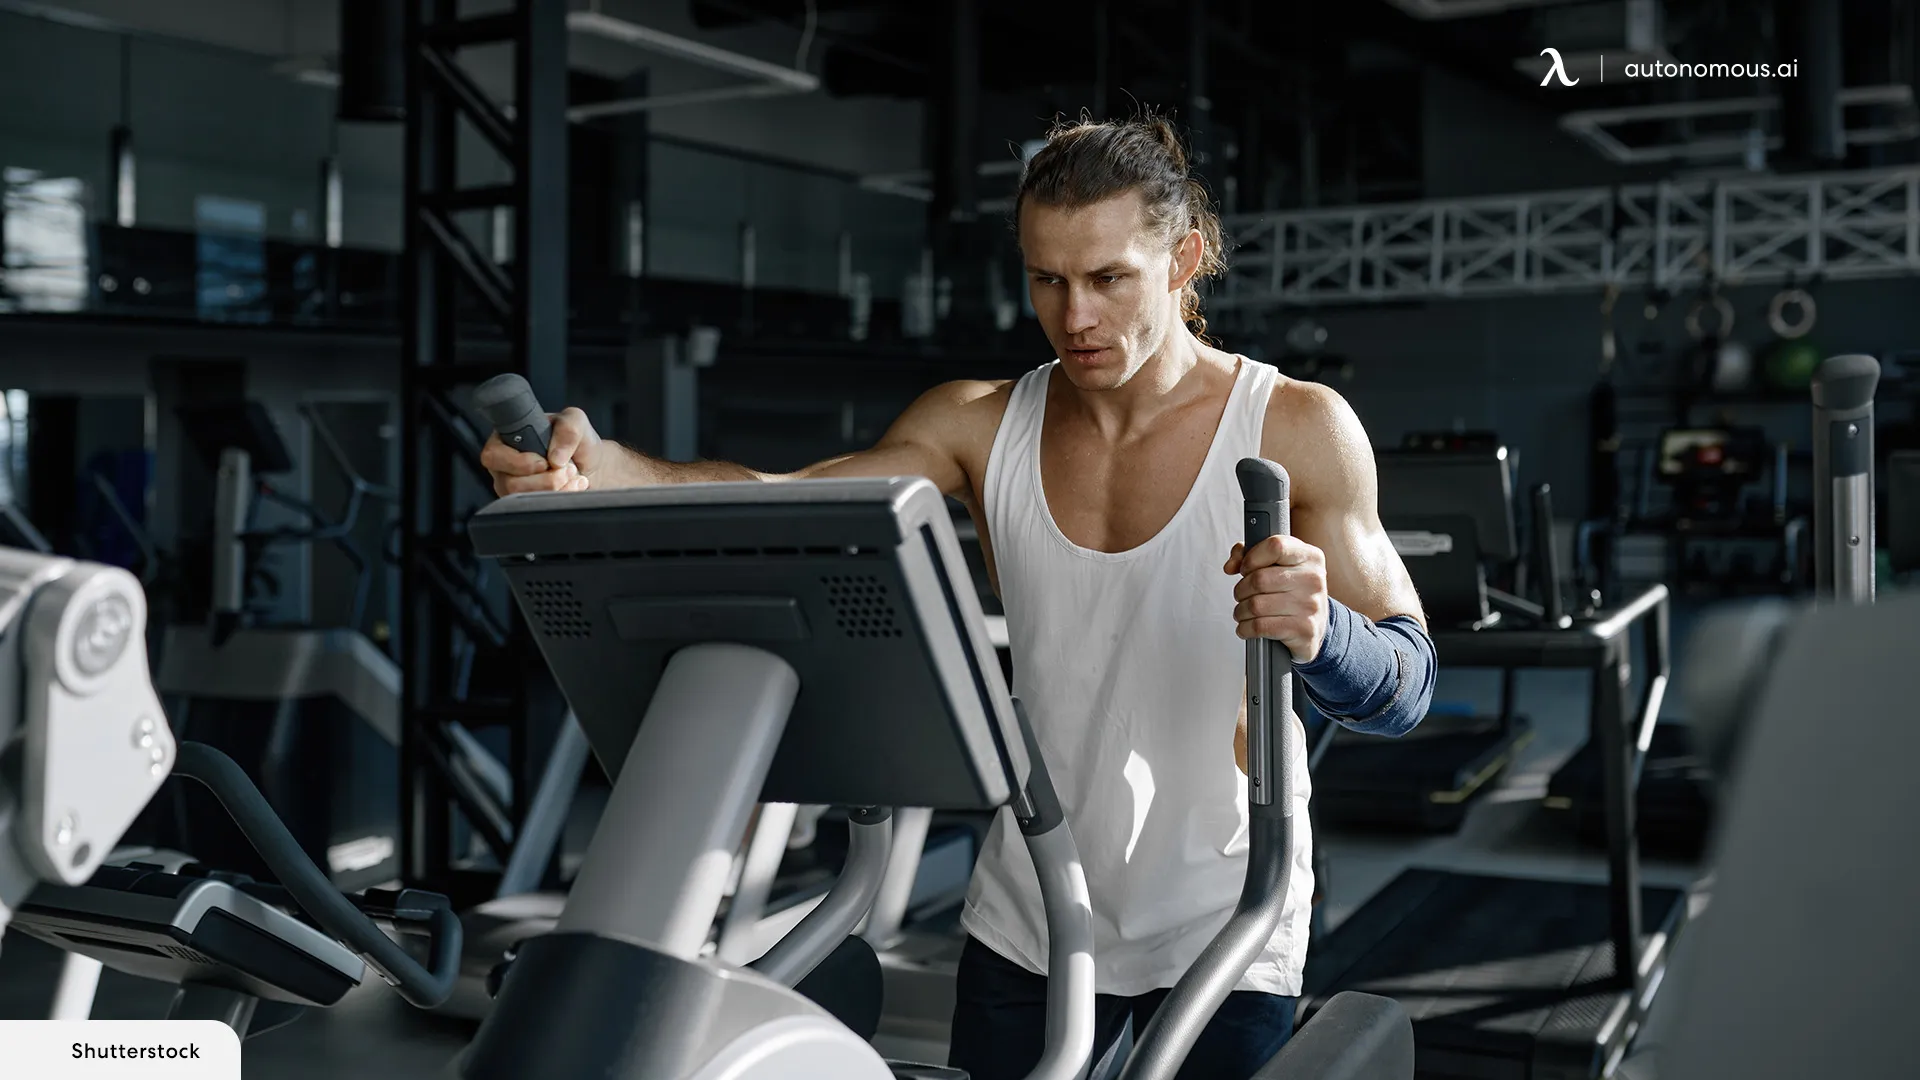 Elliptical vs. StairMaster: Which Is Better?